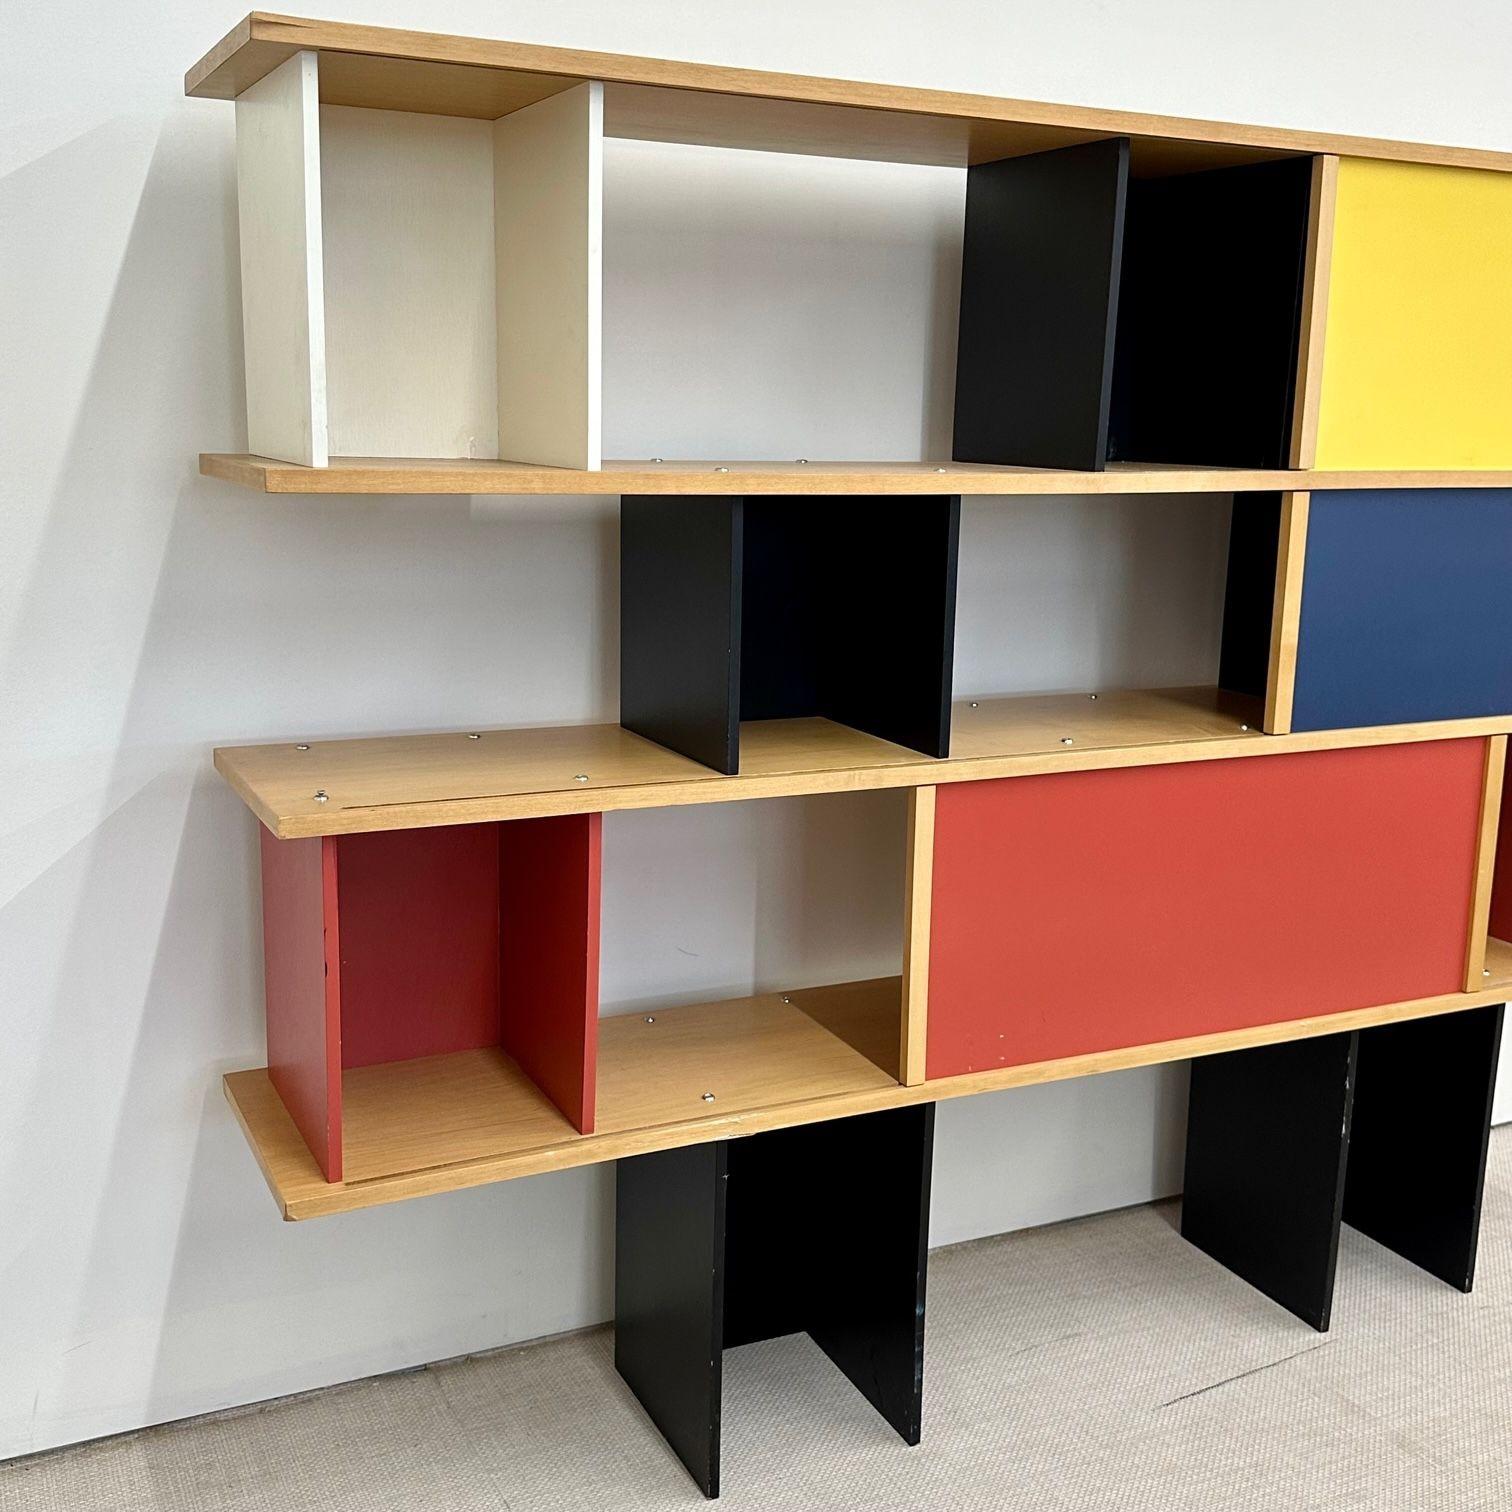 Late 20th Century Mid-Century Modern Style Shelving Unit, Bookcase, Manner Perriand, Room Divider